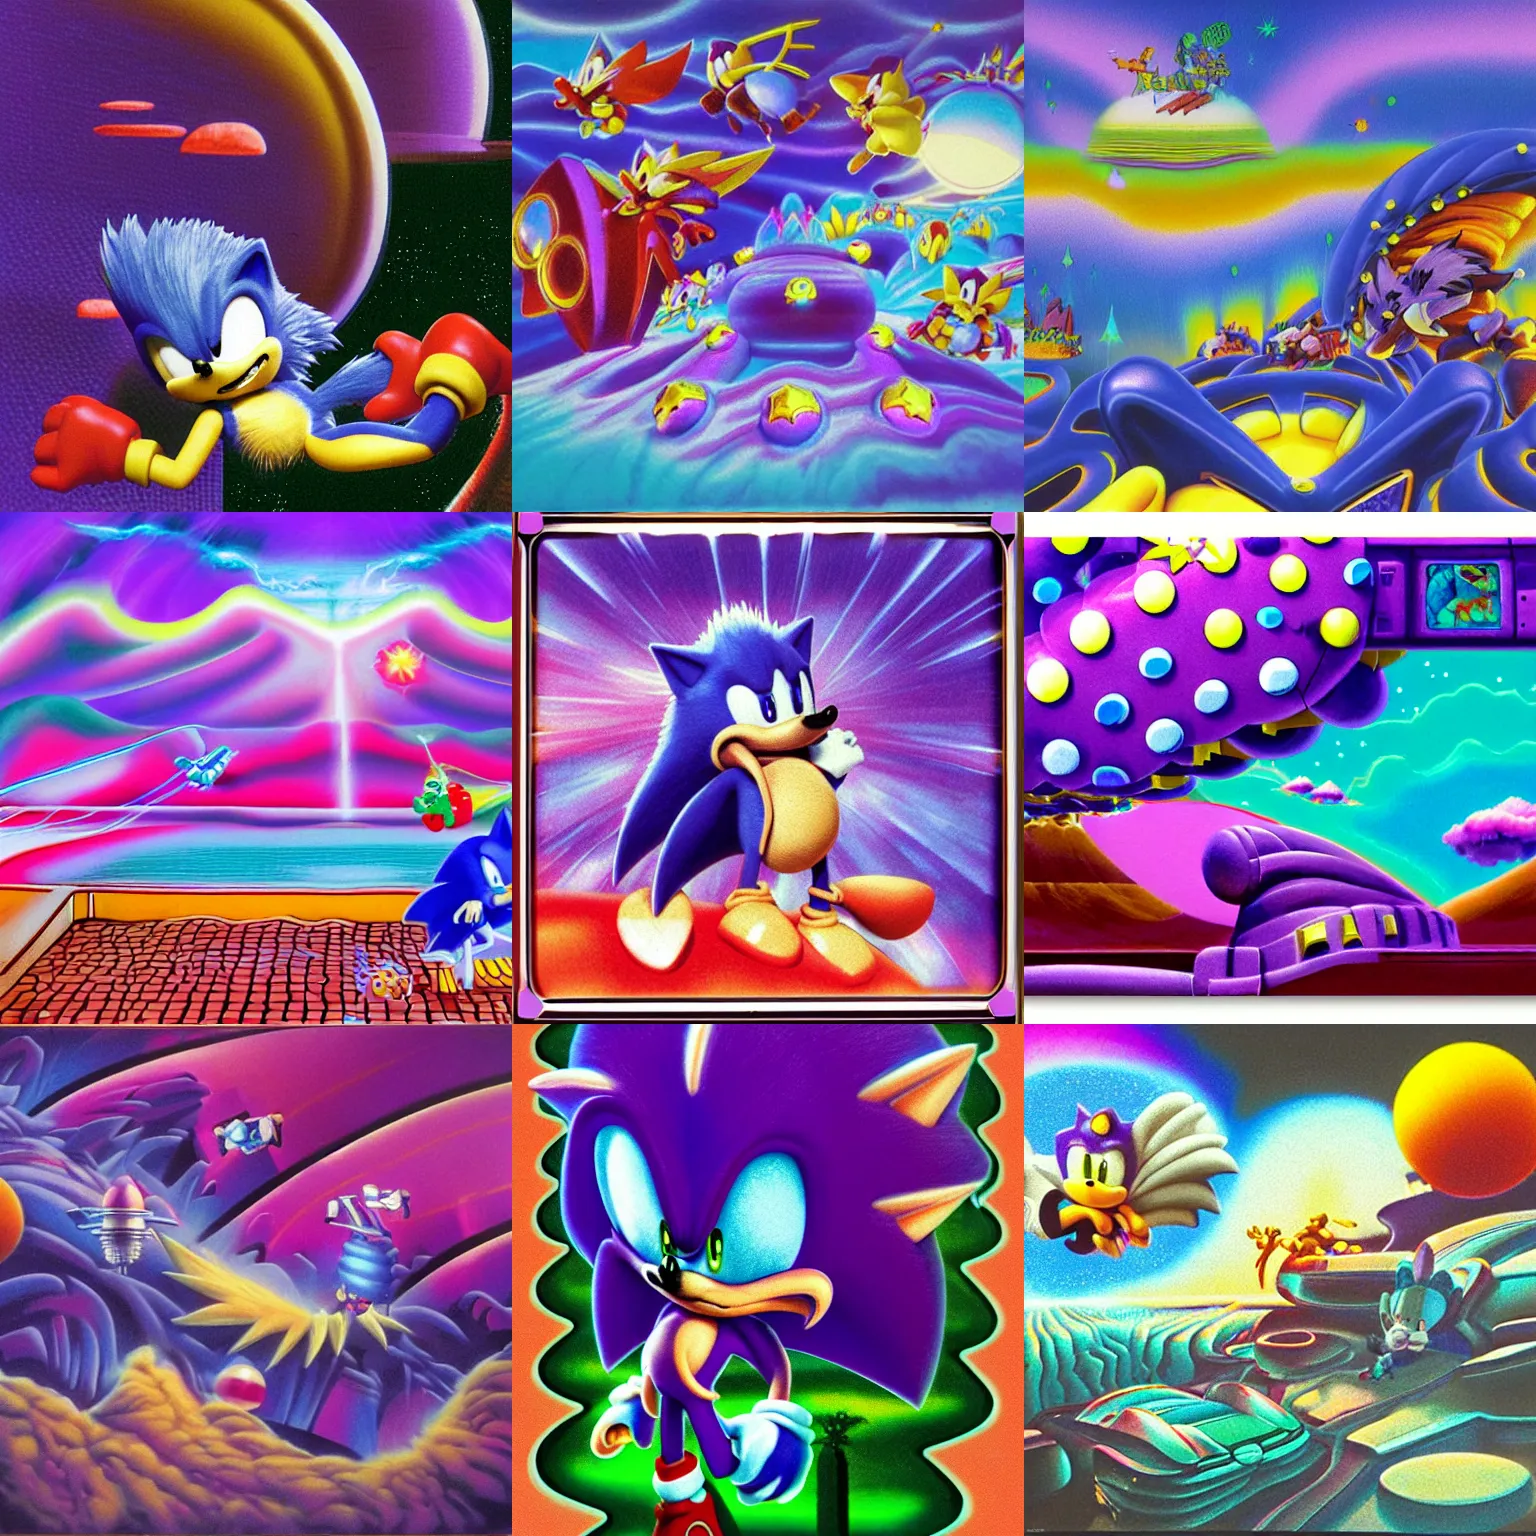 Prompt: dreaming of puffy closeup sonic hedgehog portrait colossal claymation scifi matte painting landscape of a surreal stars, retro moulded professional wooden pastels high quality airbrush art tawdry album peaceful of a liquid dissolving airbrush art lsd sonic the hedgehog swimming through cyberspace purple ambiguous checkerboard background 1 9 8 0 s 1 9 8 2 sega genesis video game album cover